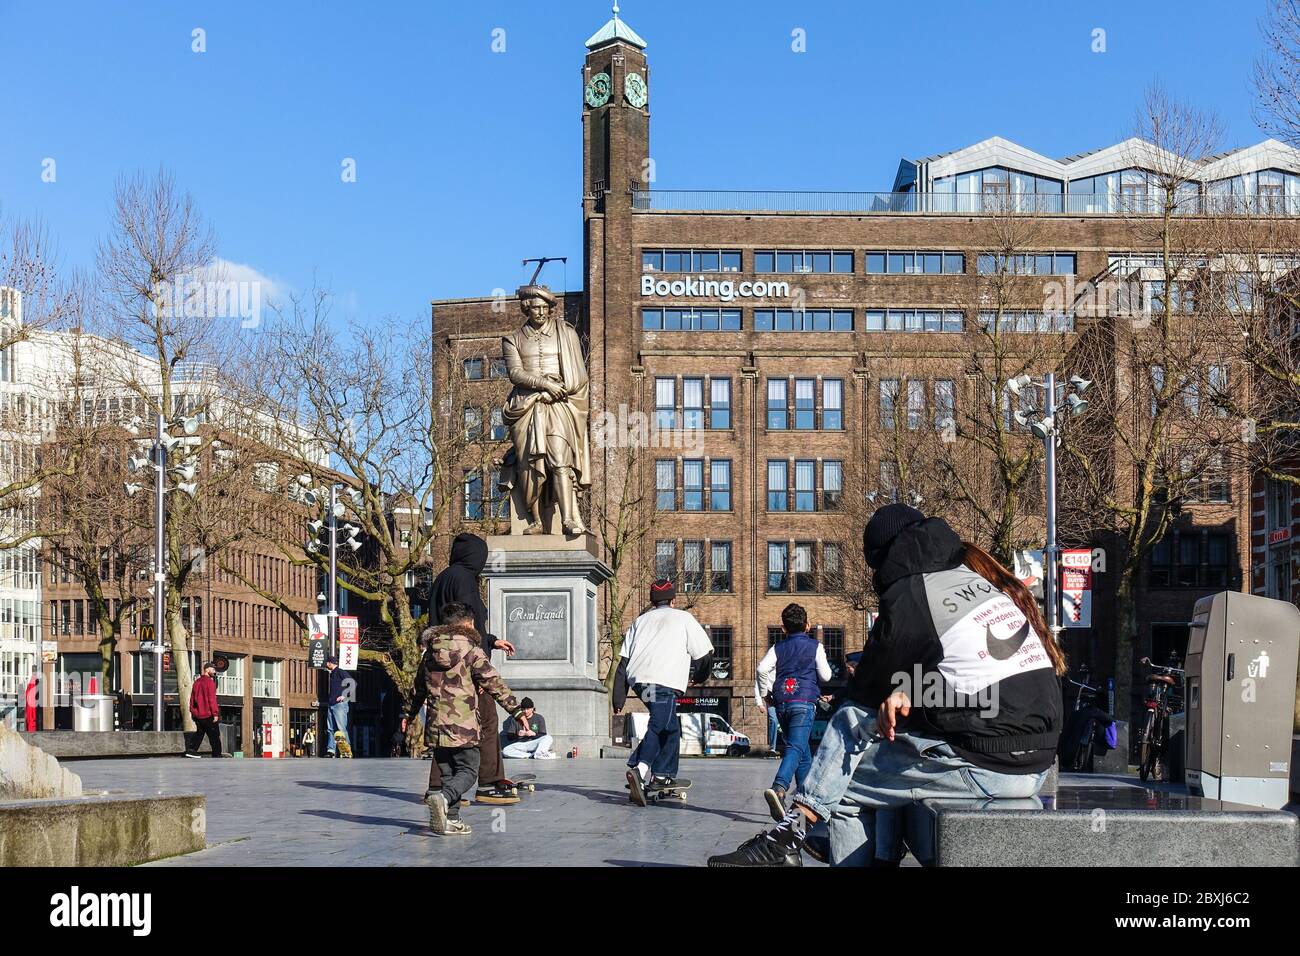 Booking.com headquarters on Rembrandtplein in Amsterdam, with skaters during the coronavirus crisis Stock Photo